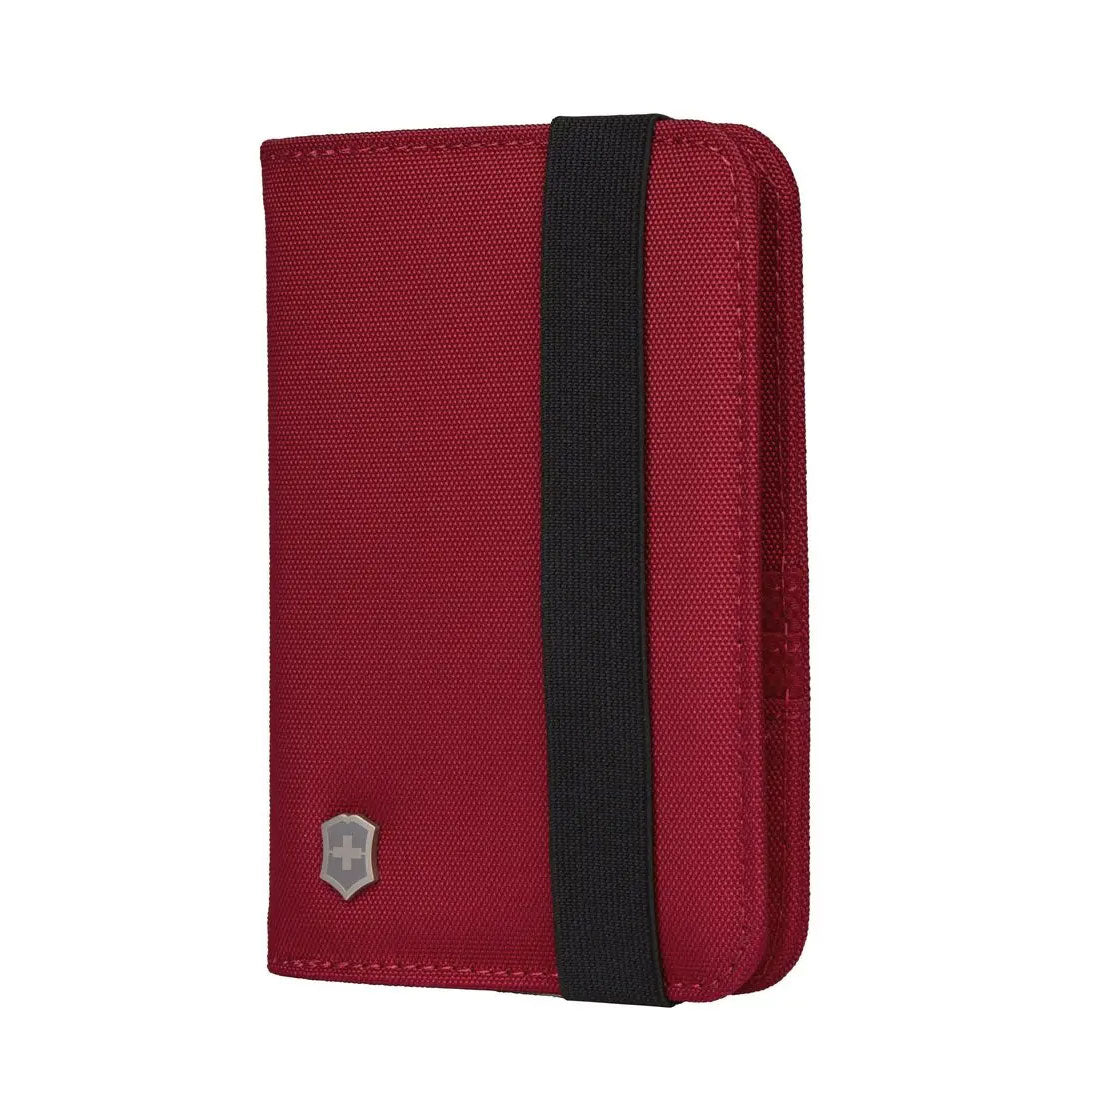 Victorinox Swiss Army Travel Accessories 5.0 Passport Holder with RIFD Protection